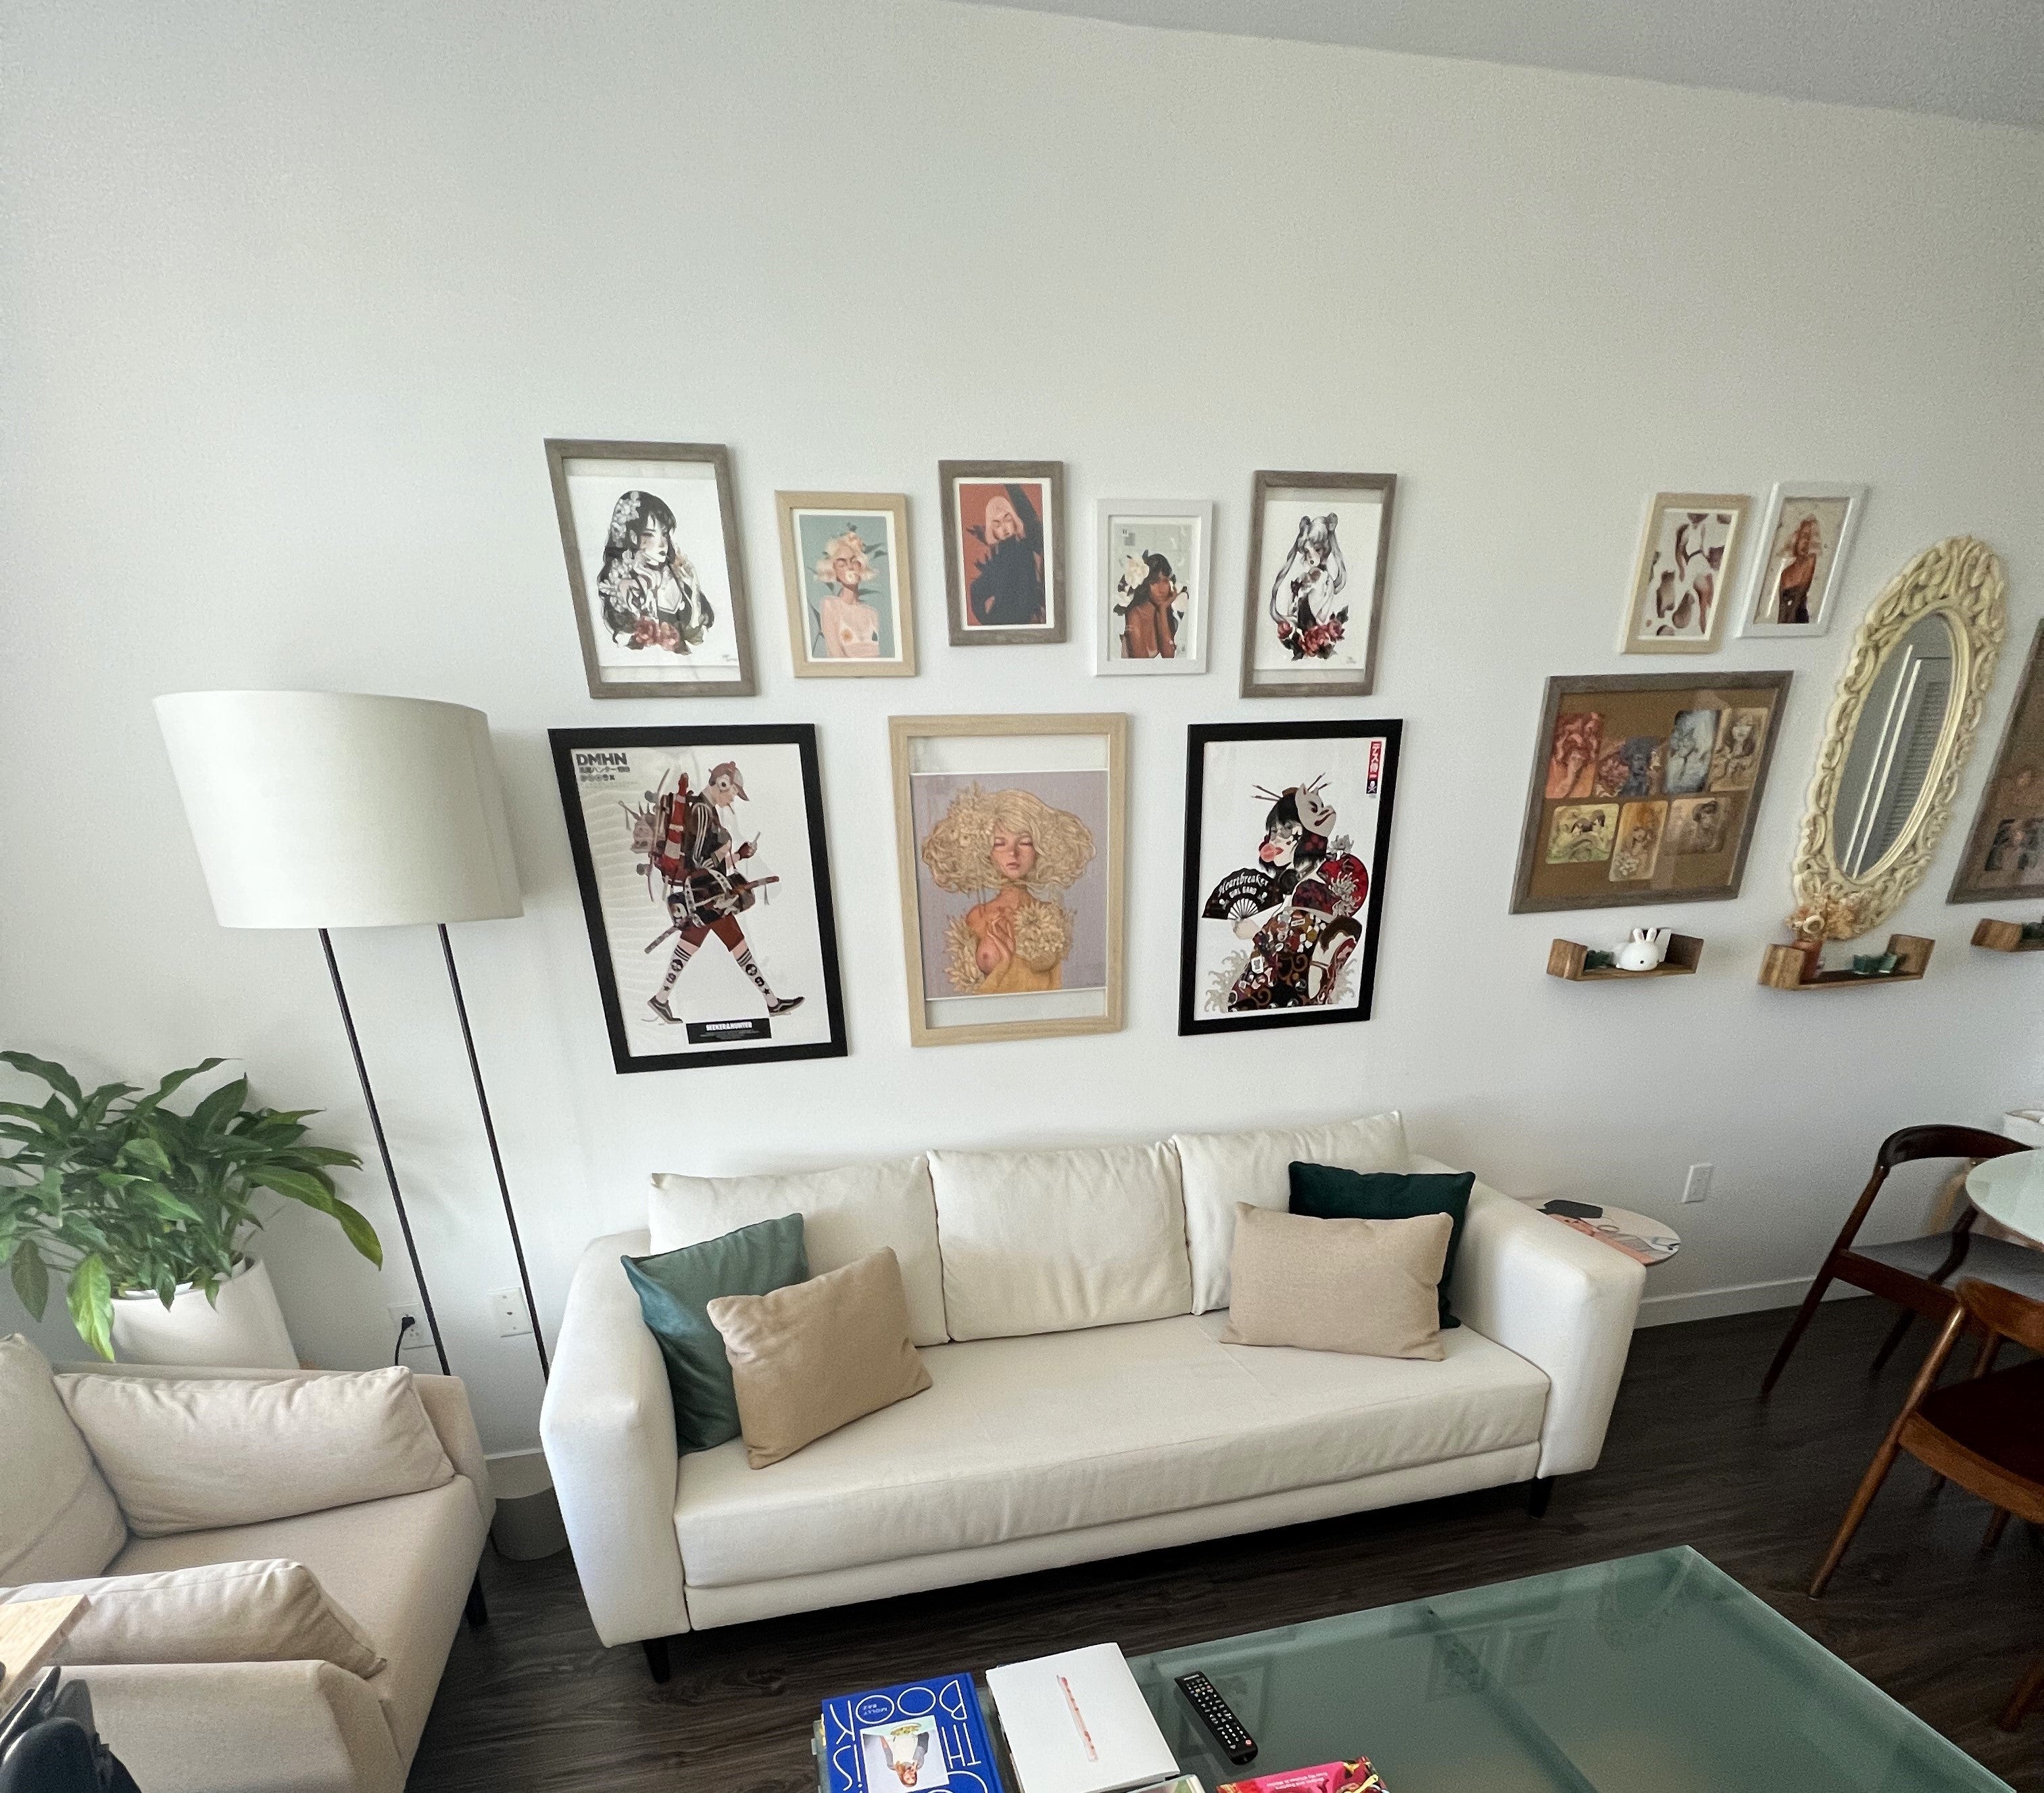 6 Ways to Set Up a Gallery Wall